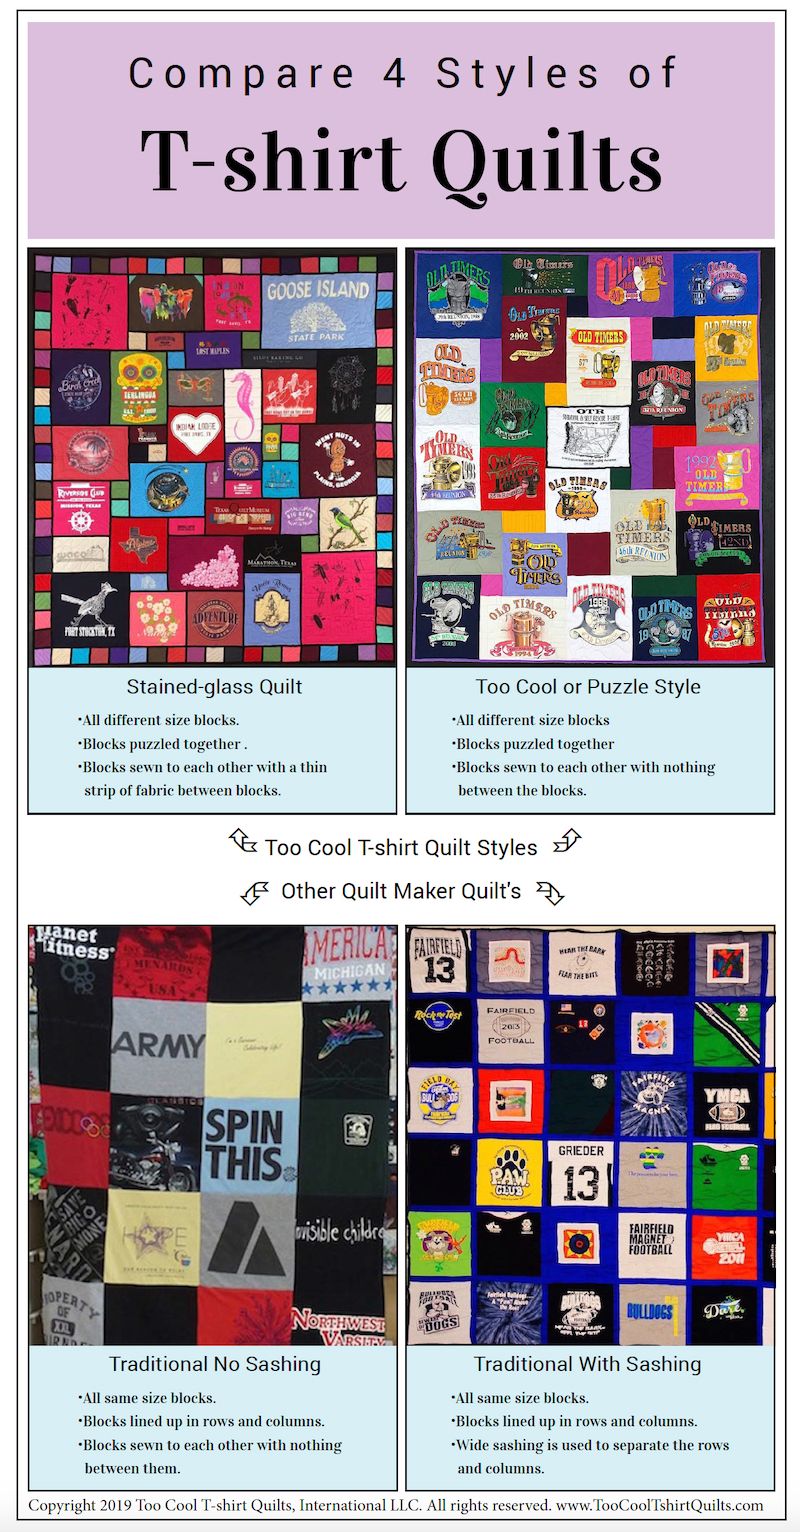 Compare 4 Styles of T-shirt Quilts